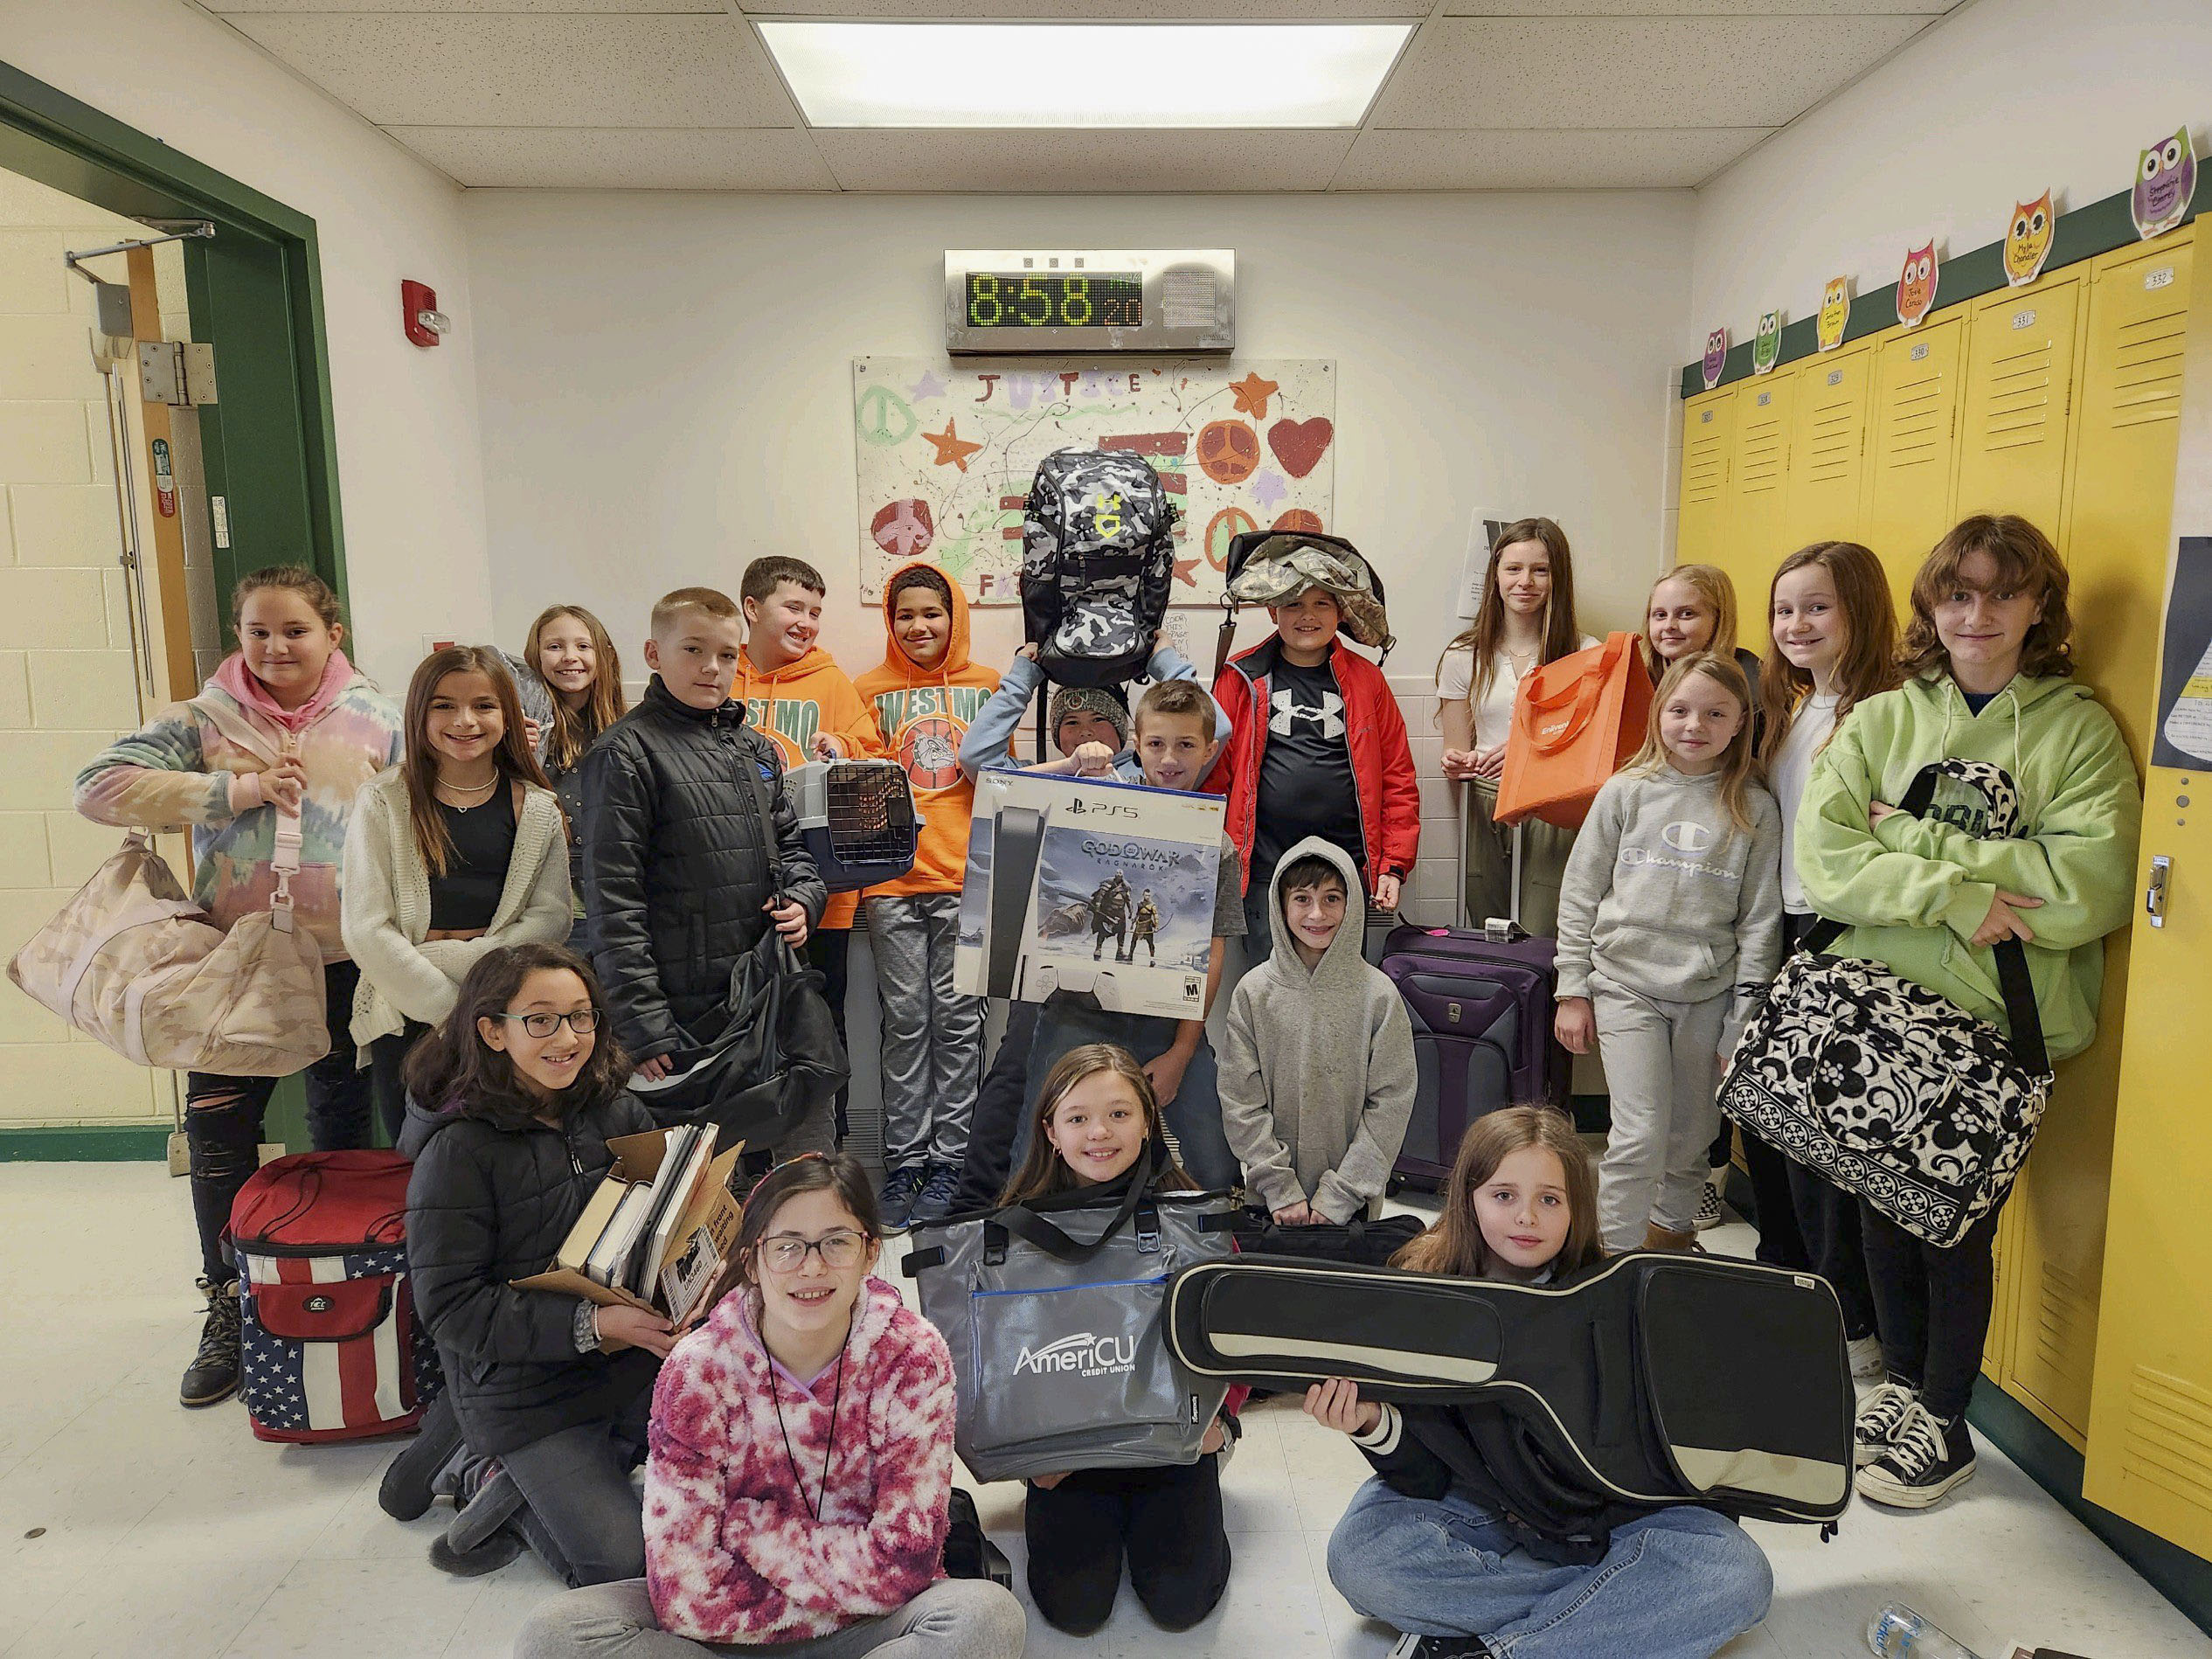 Upper Elementary Students Participate in "Anything But a Backpack Day"